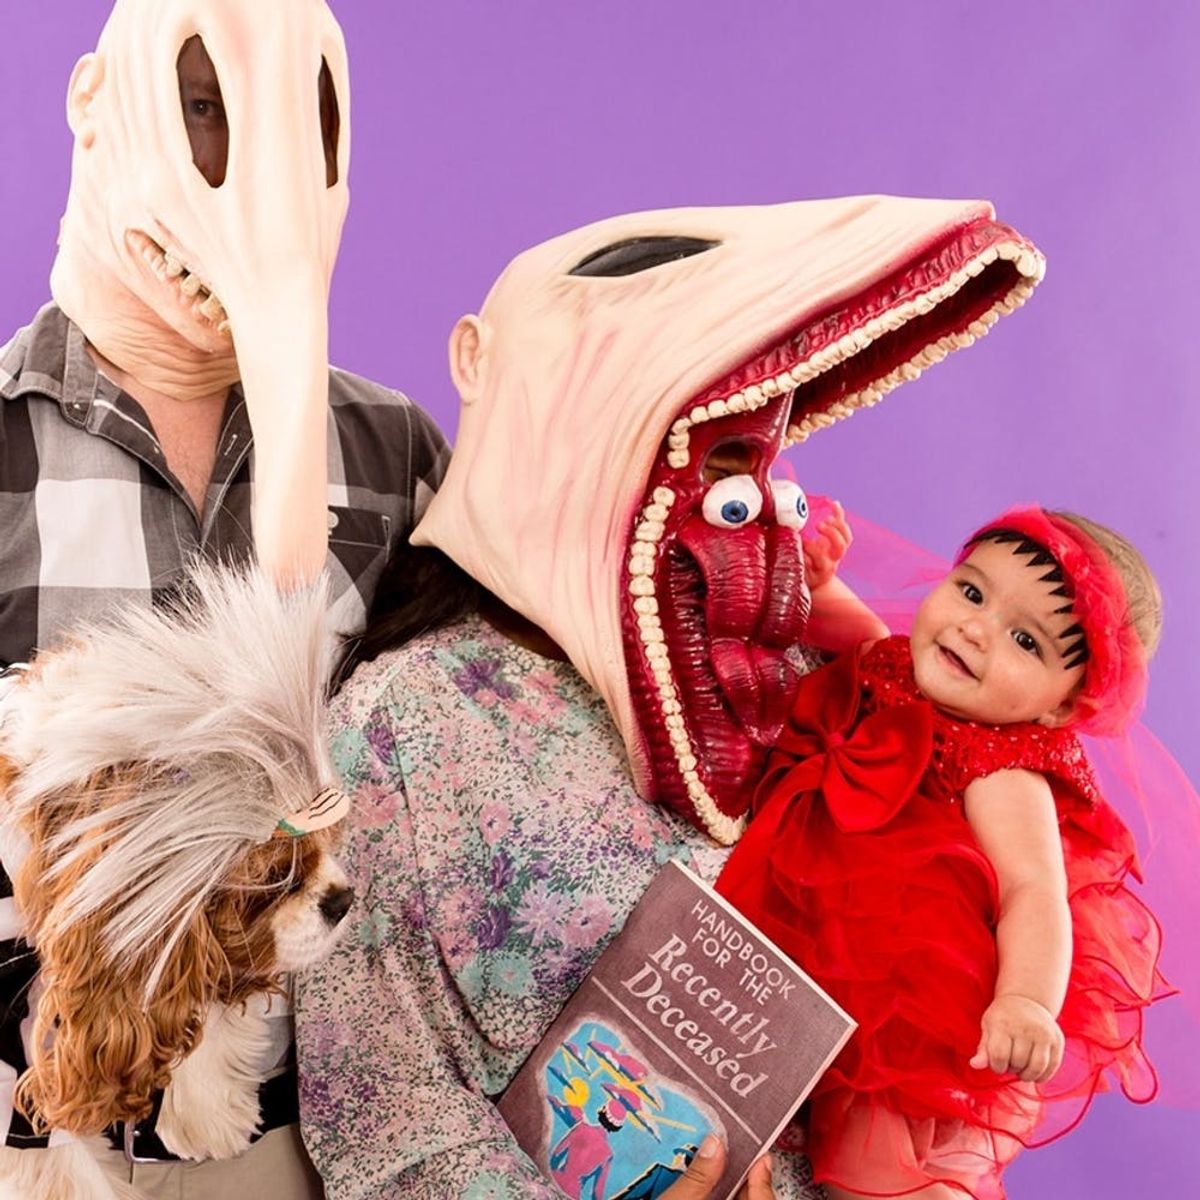 5 Family Halloween Costumes Inspired by Classic ‘80s Movies